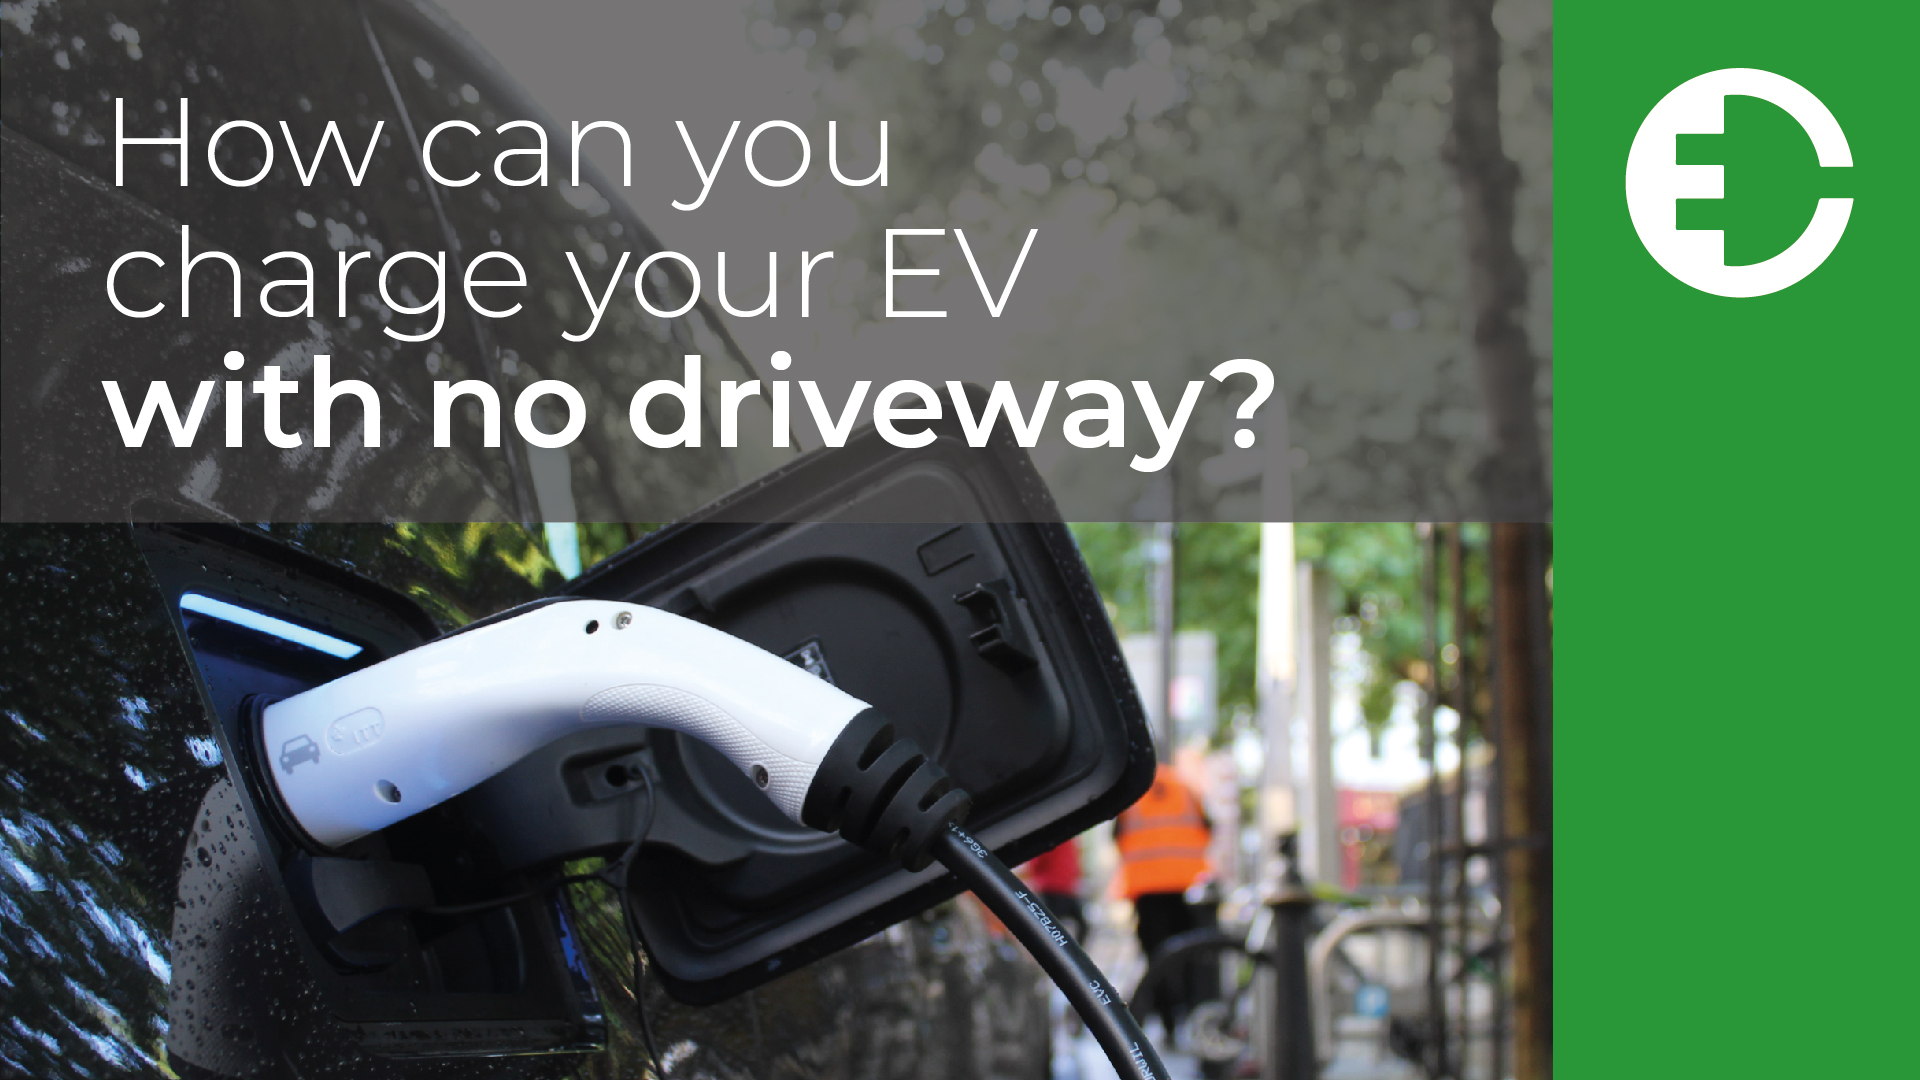 How can you charge your EV with no driveway?